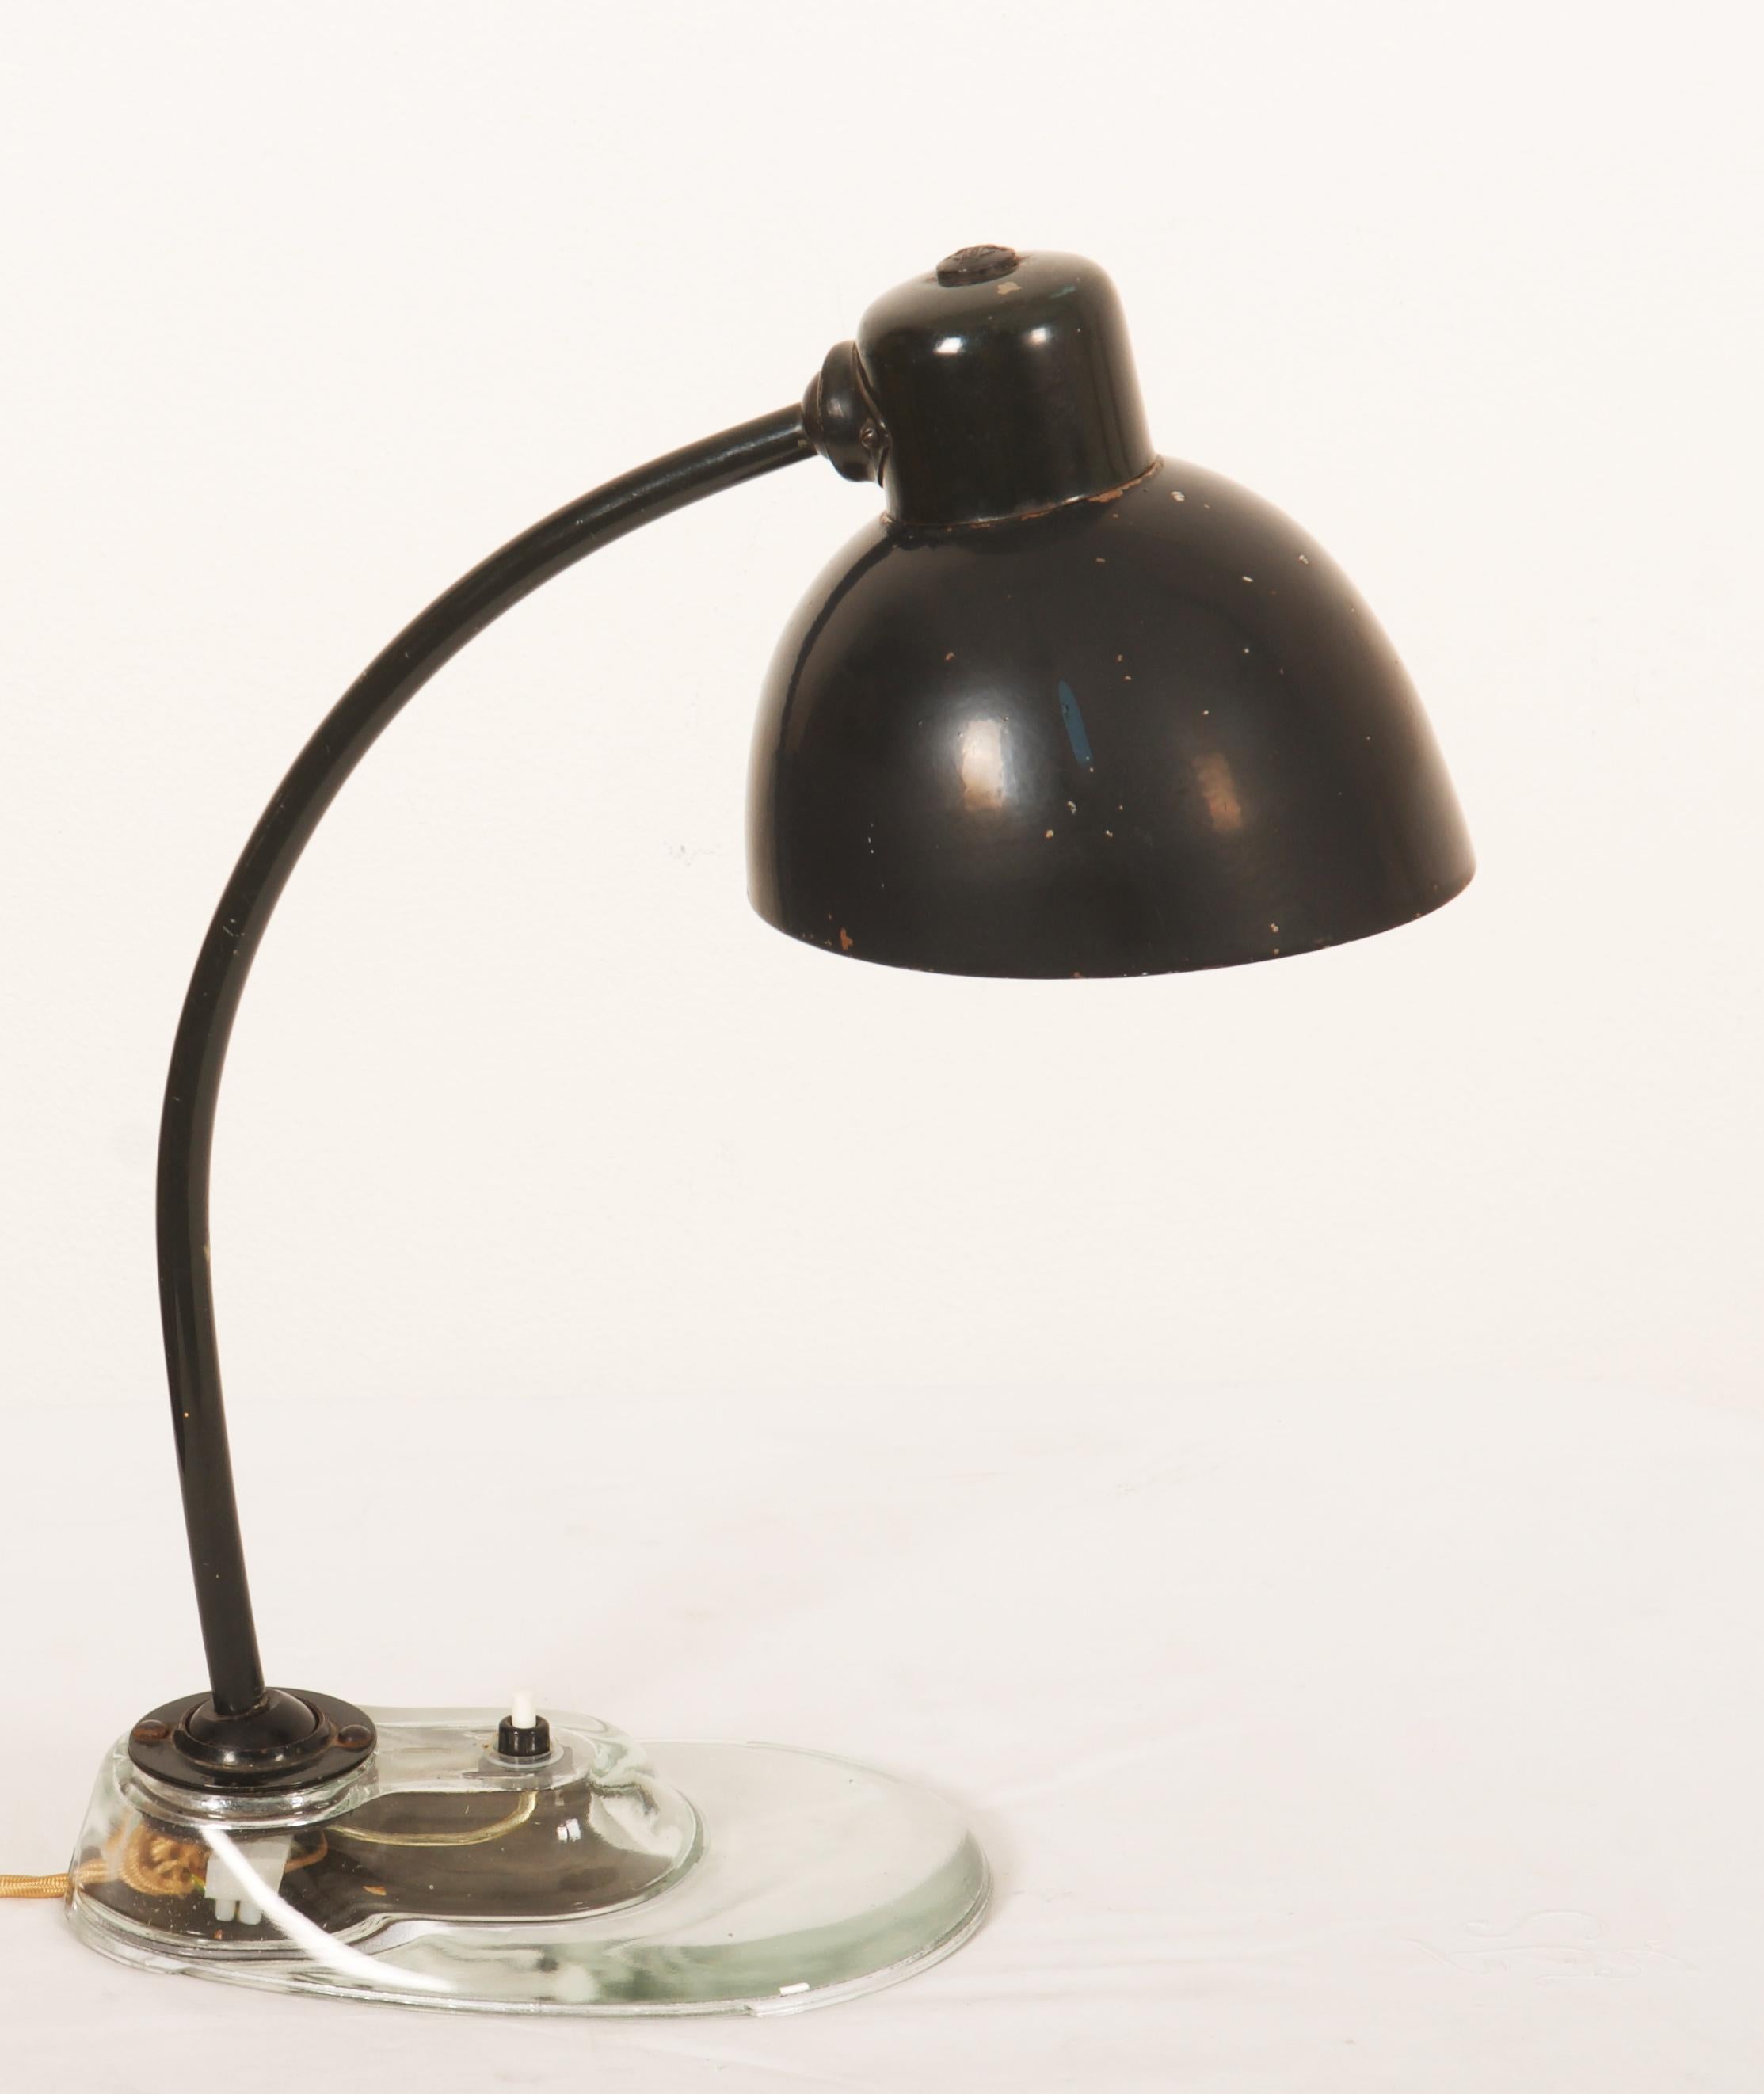 Beautiful iconic Bauhaus desk lamp designed by Marianne Brandt for Kandem Leuchtenbau Leipzig. It has the typical glass base which makes this model the much sought after one fitted with one E27 socket. Wonderful original condition with new